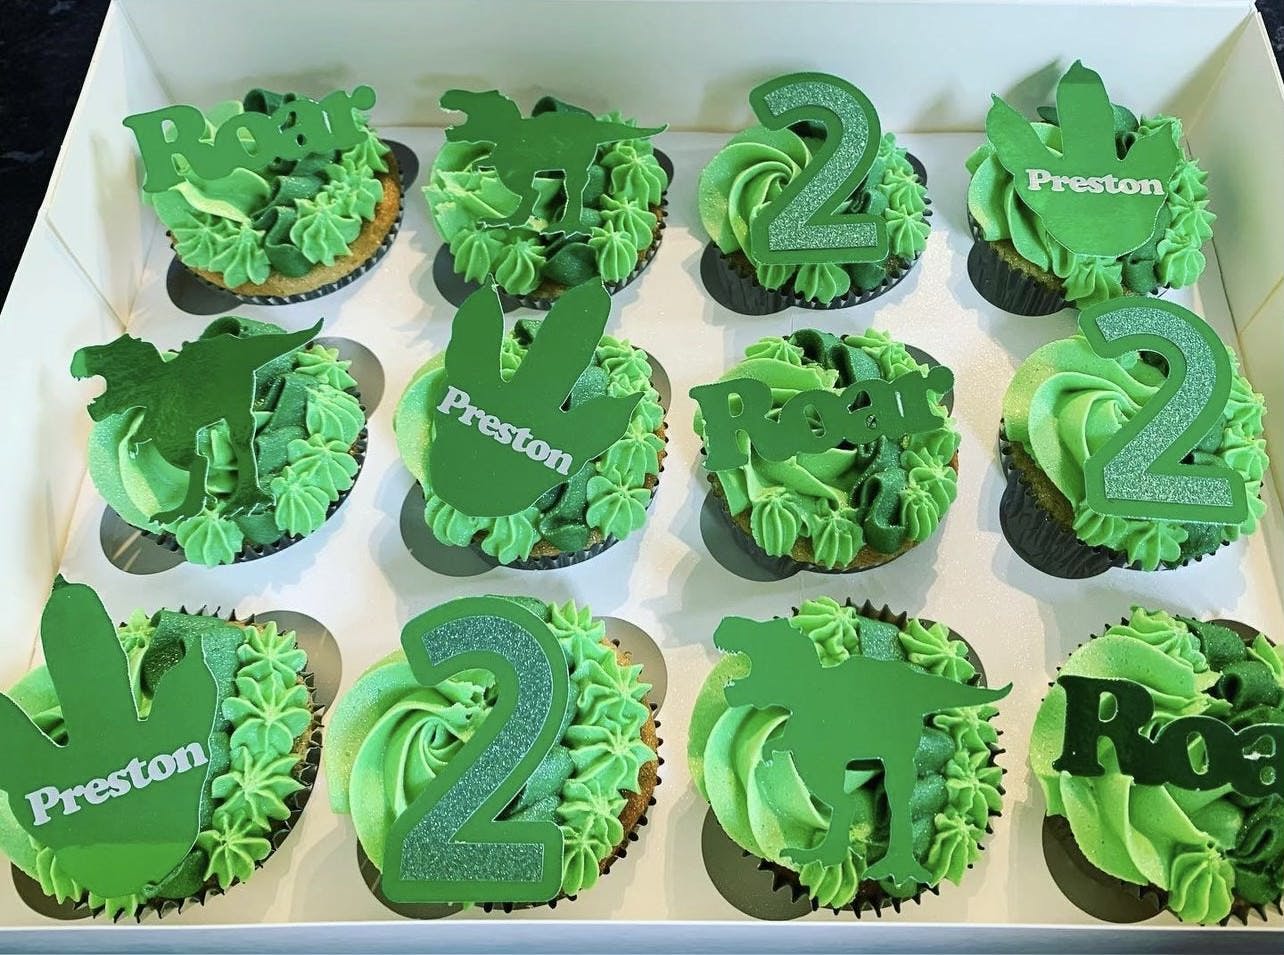 Green frosted cupcakes with dinosaur shapes on top for a second birthday